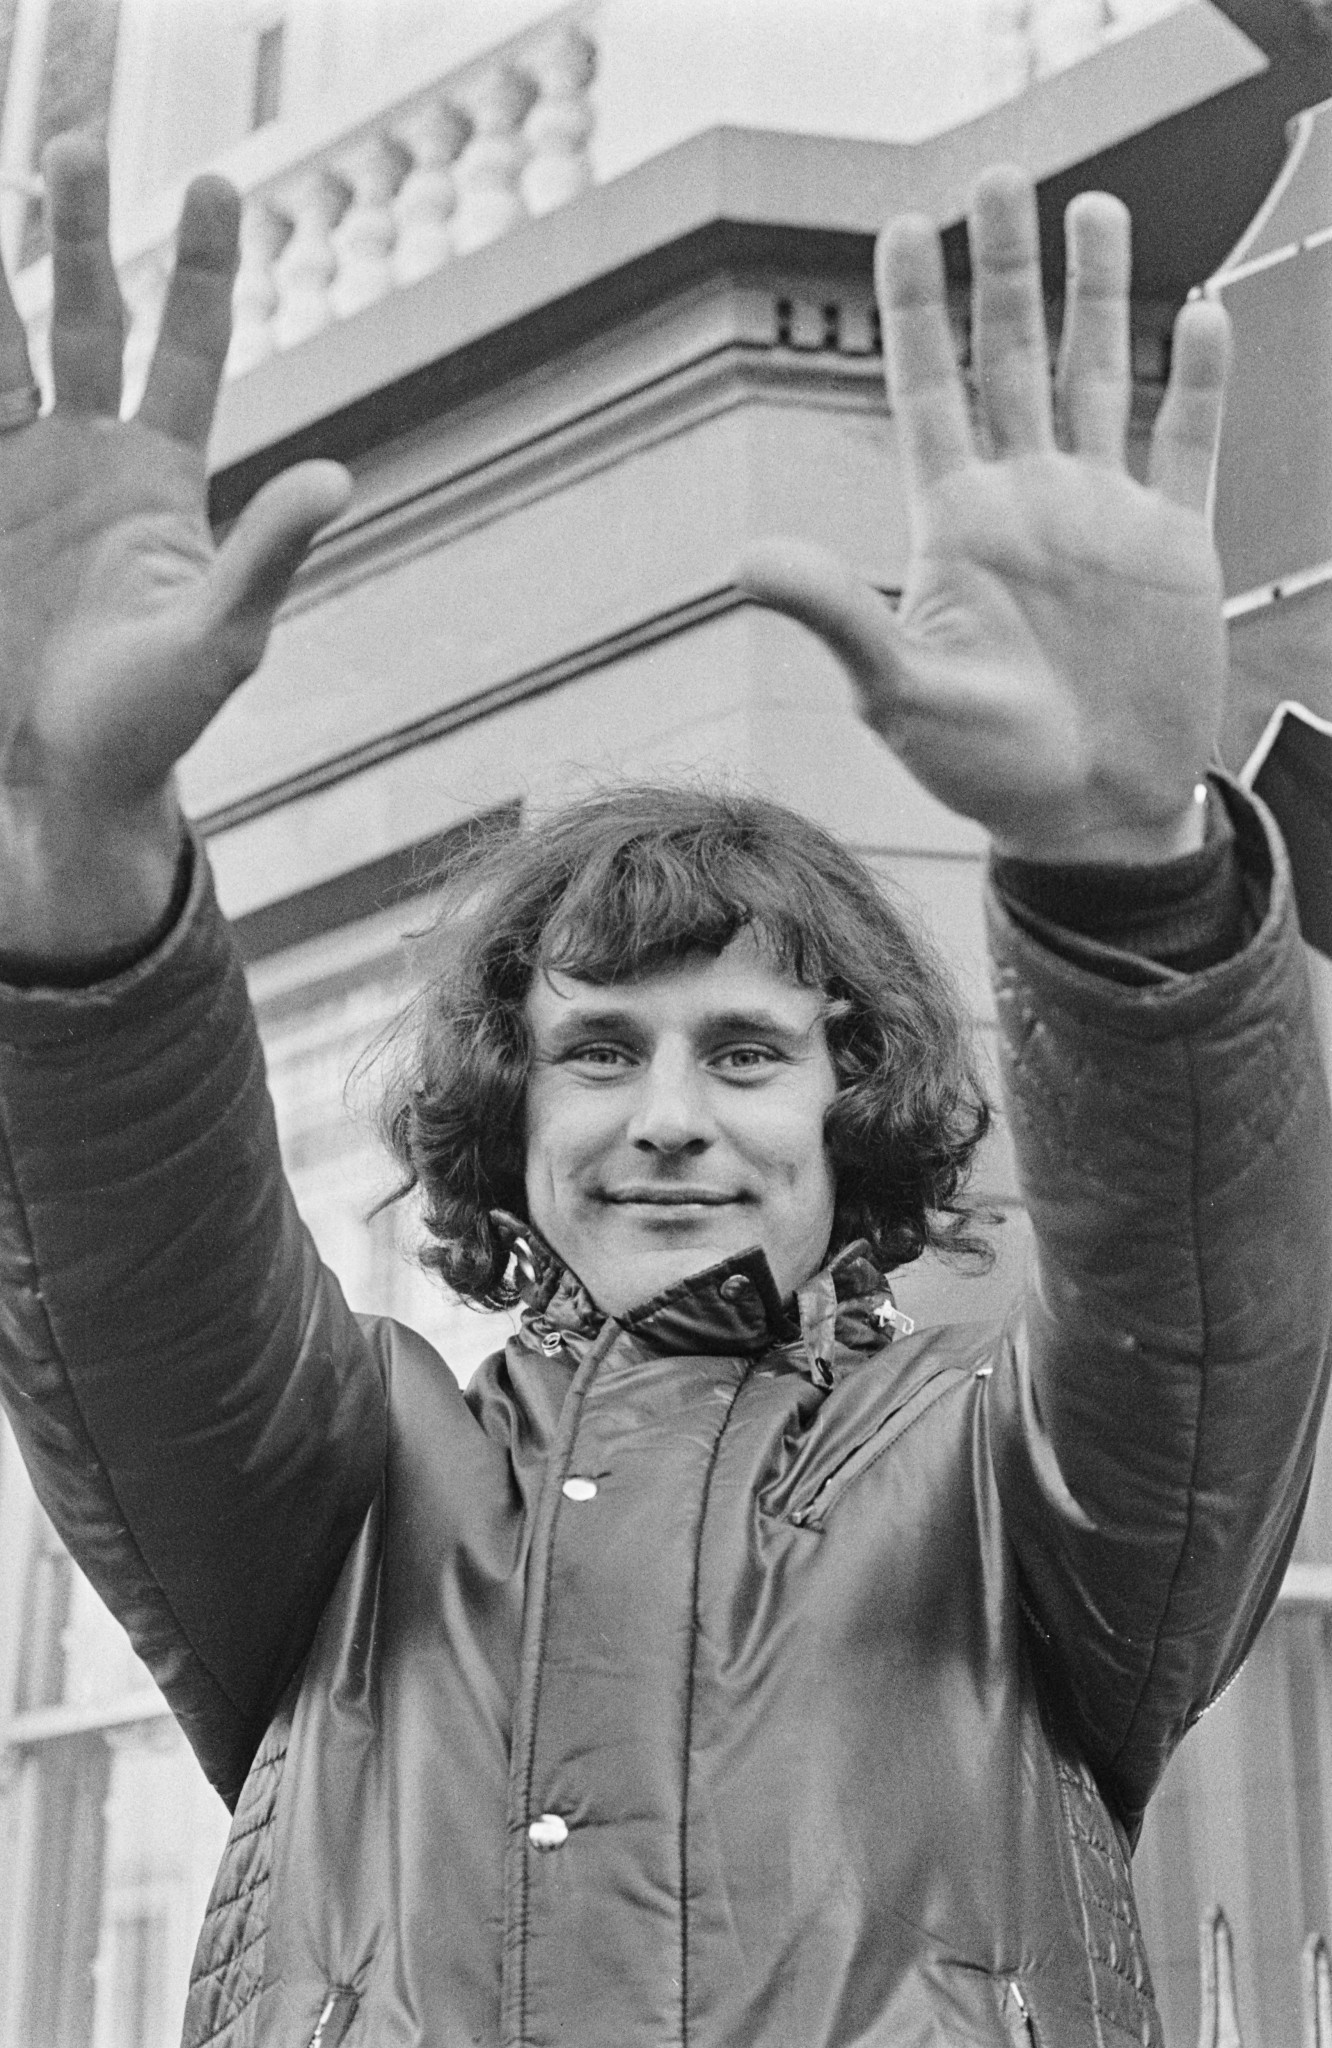 Poland goalkeeper JanTomaszewski revealed he had broken bones in his finger during the 1973 World Cup qualifier against England at Wembley  ©Getty Images